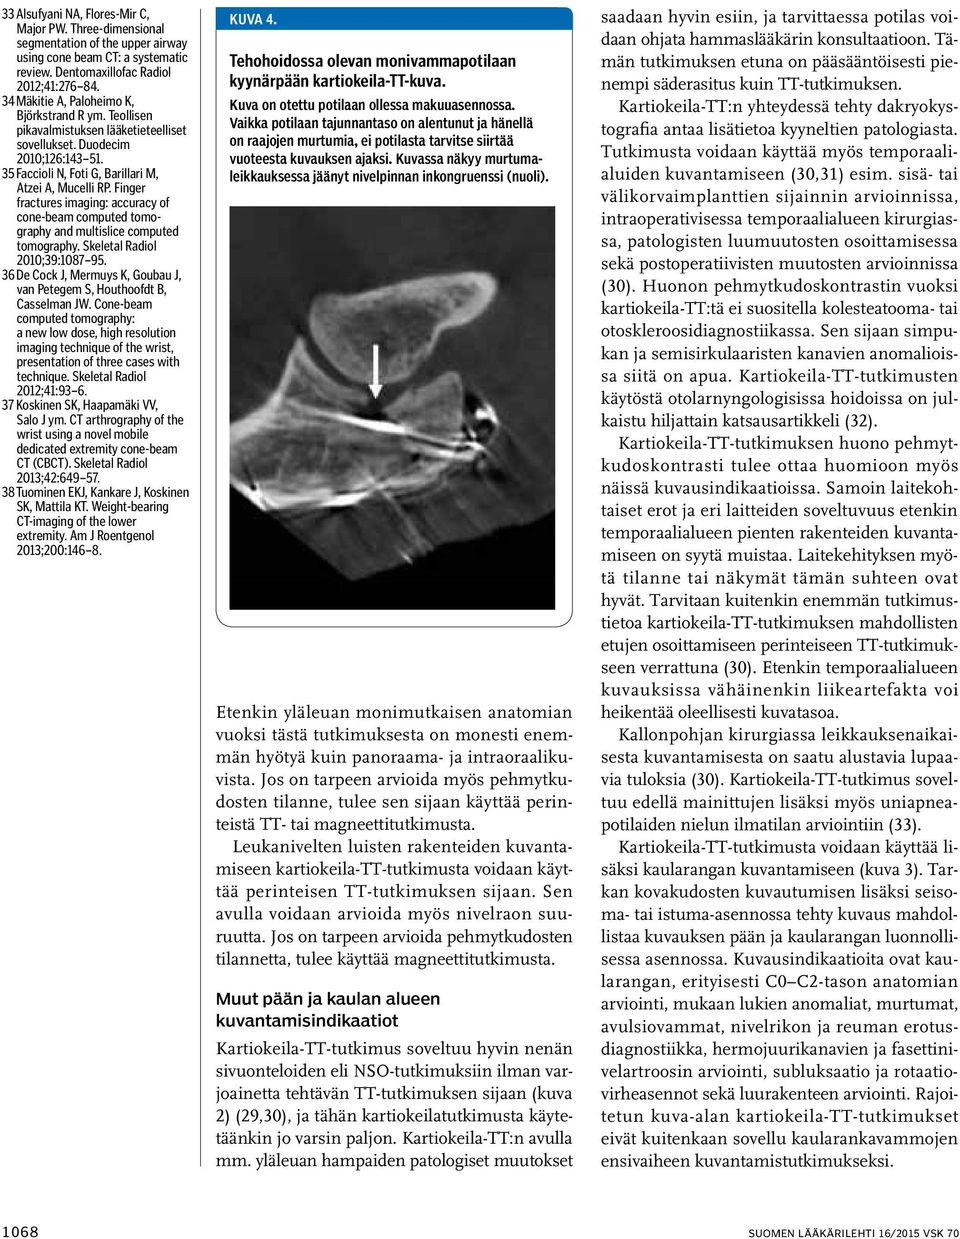 Finger fractures imaging: accuracy of cone-beam computed tomography and multislice computed tomography. Skeletal Radiol 2010;39:1087 95.